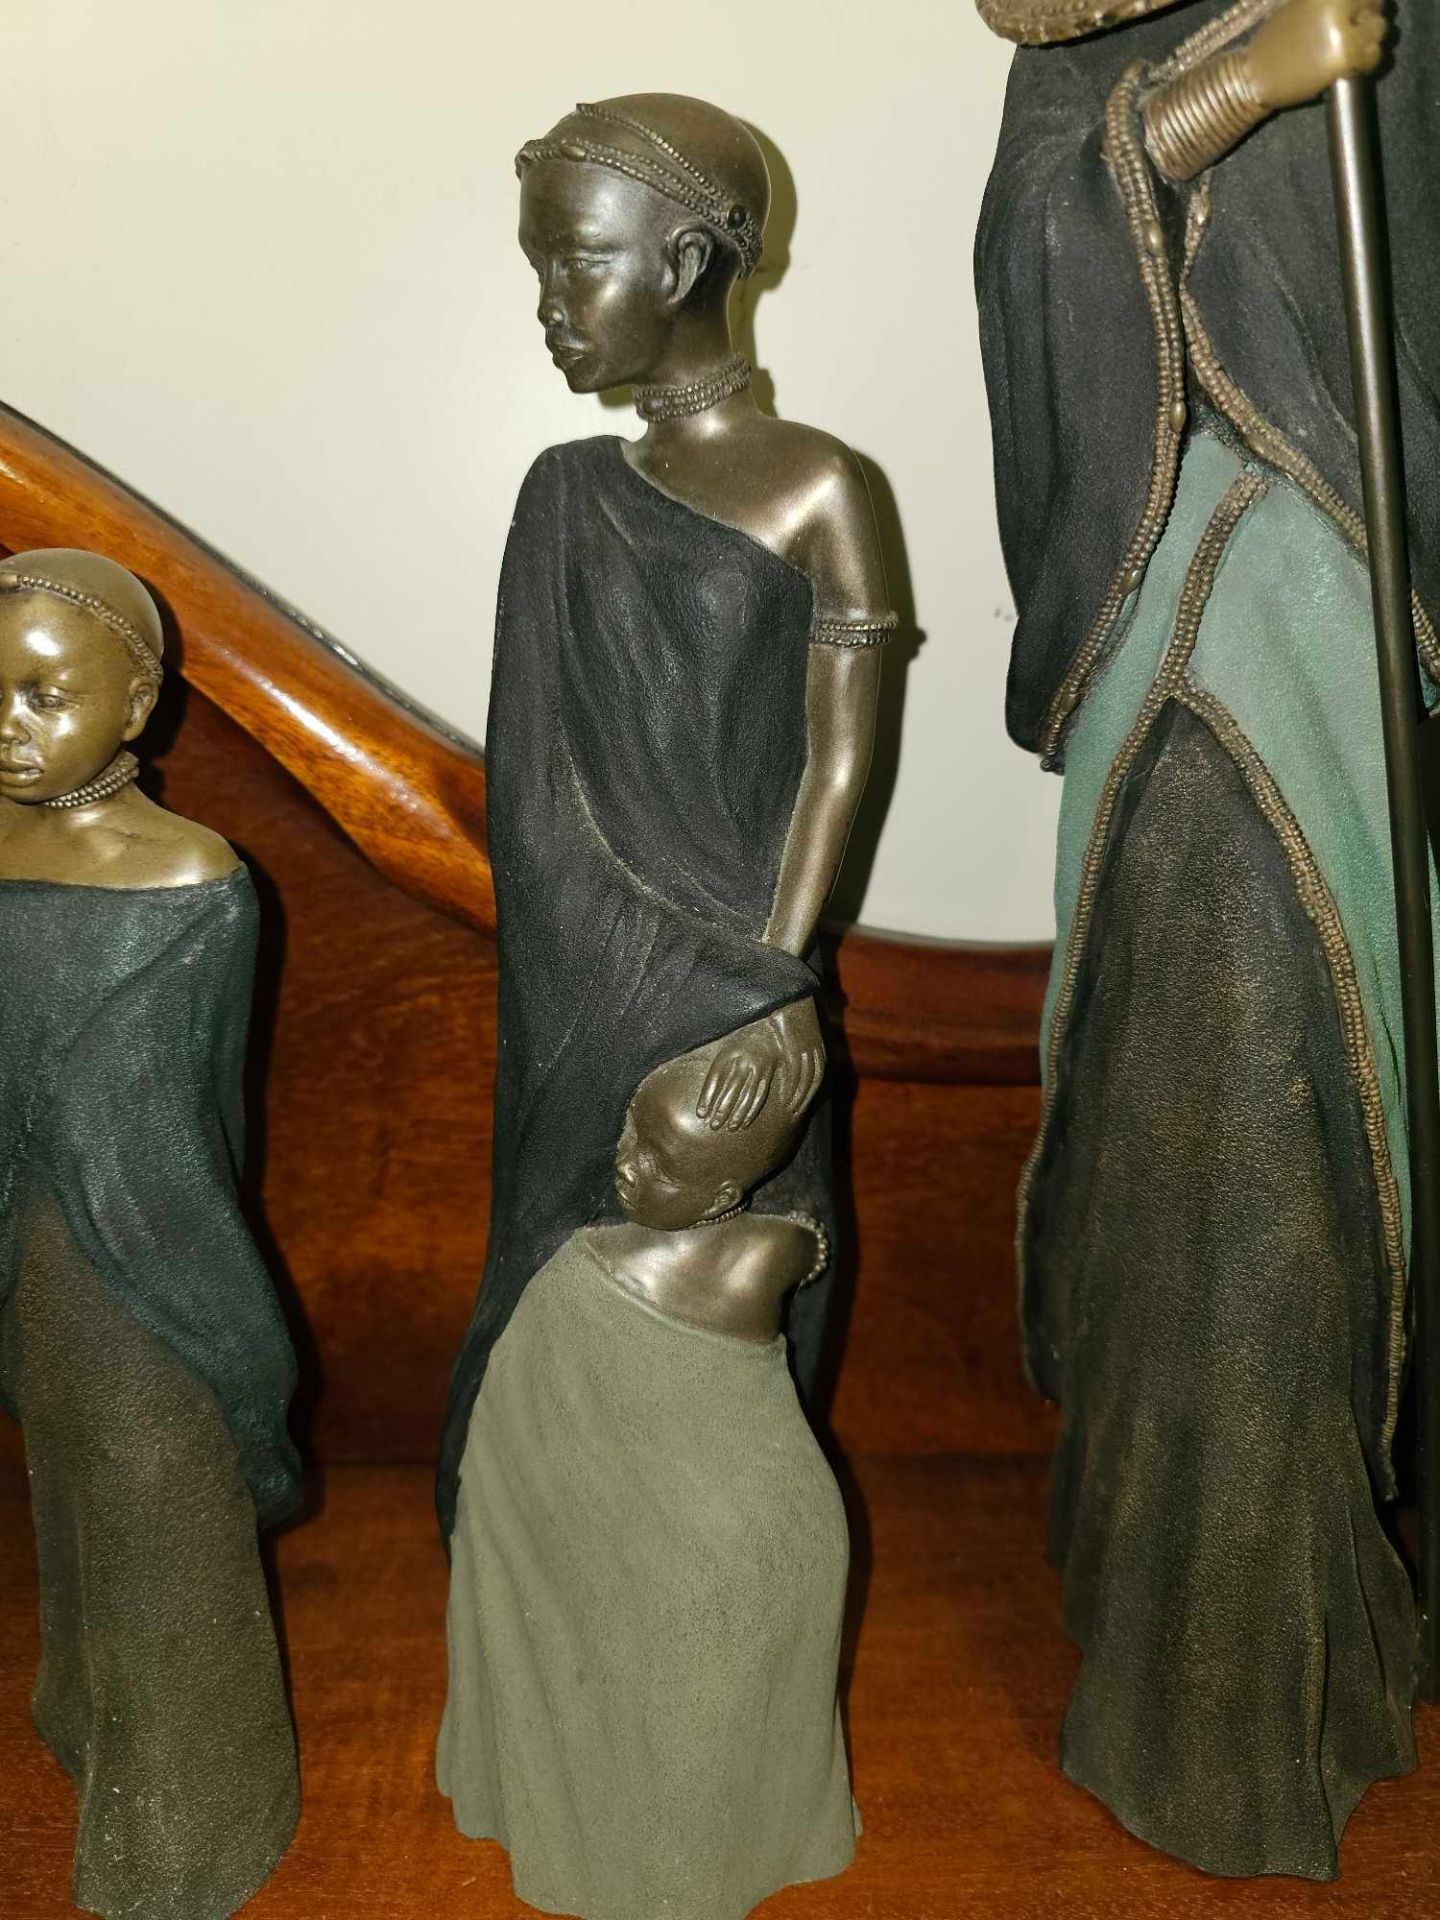 Stacy Bayne Maasai Soul Journey Bronze/Painted Limited Edition Figurines x 5 - Image 4 of 6